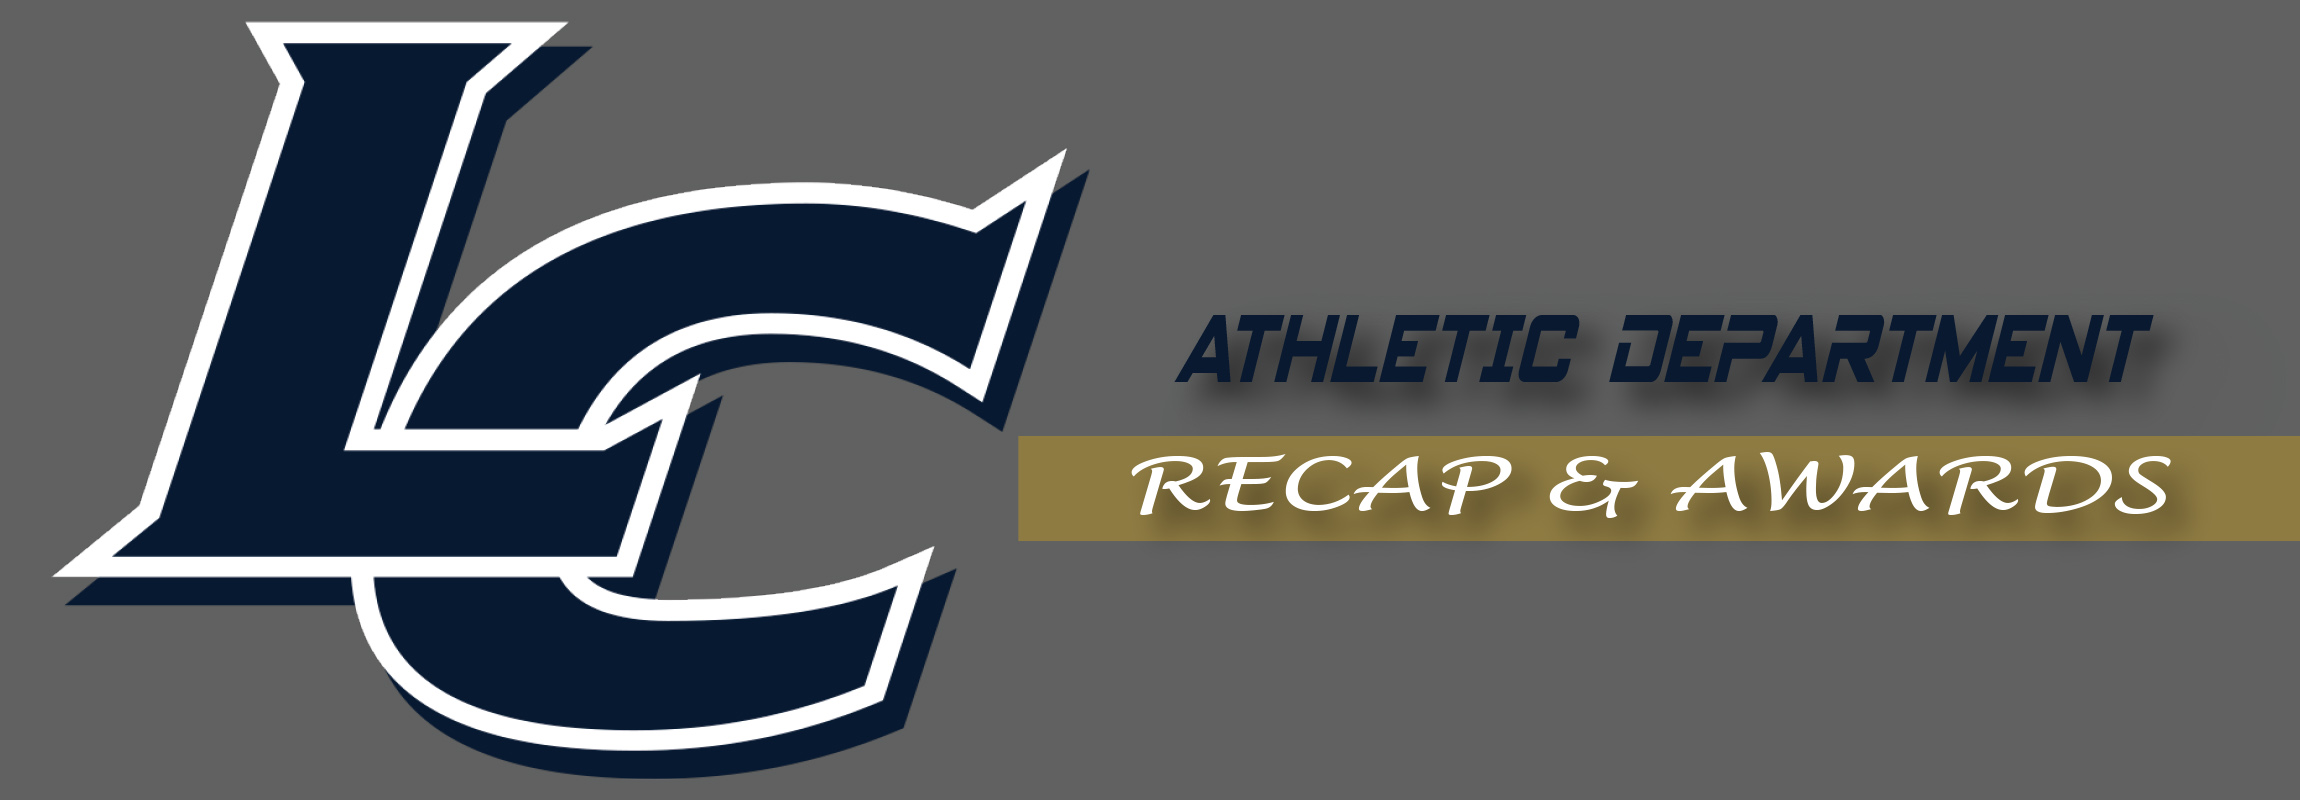 Athletic Department Recap And Awards 2021 2022 Linfield Christian Athletics